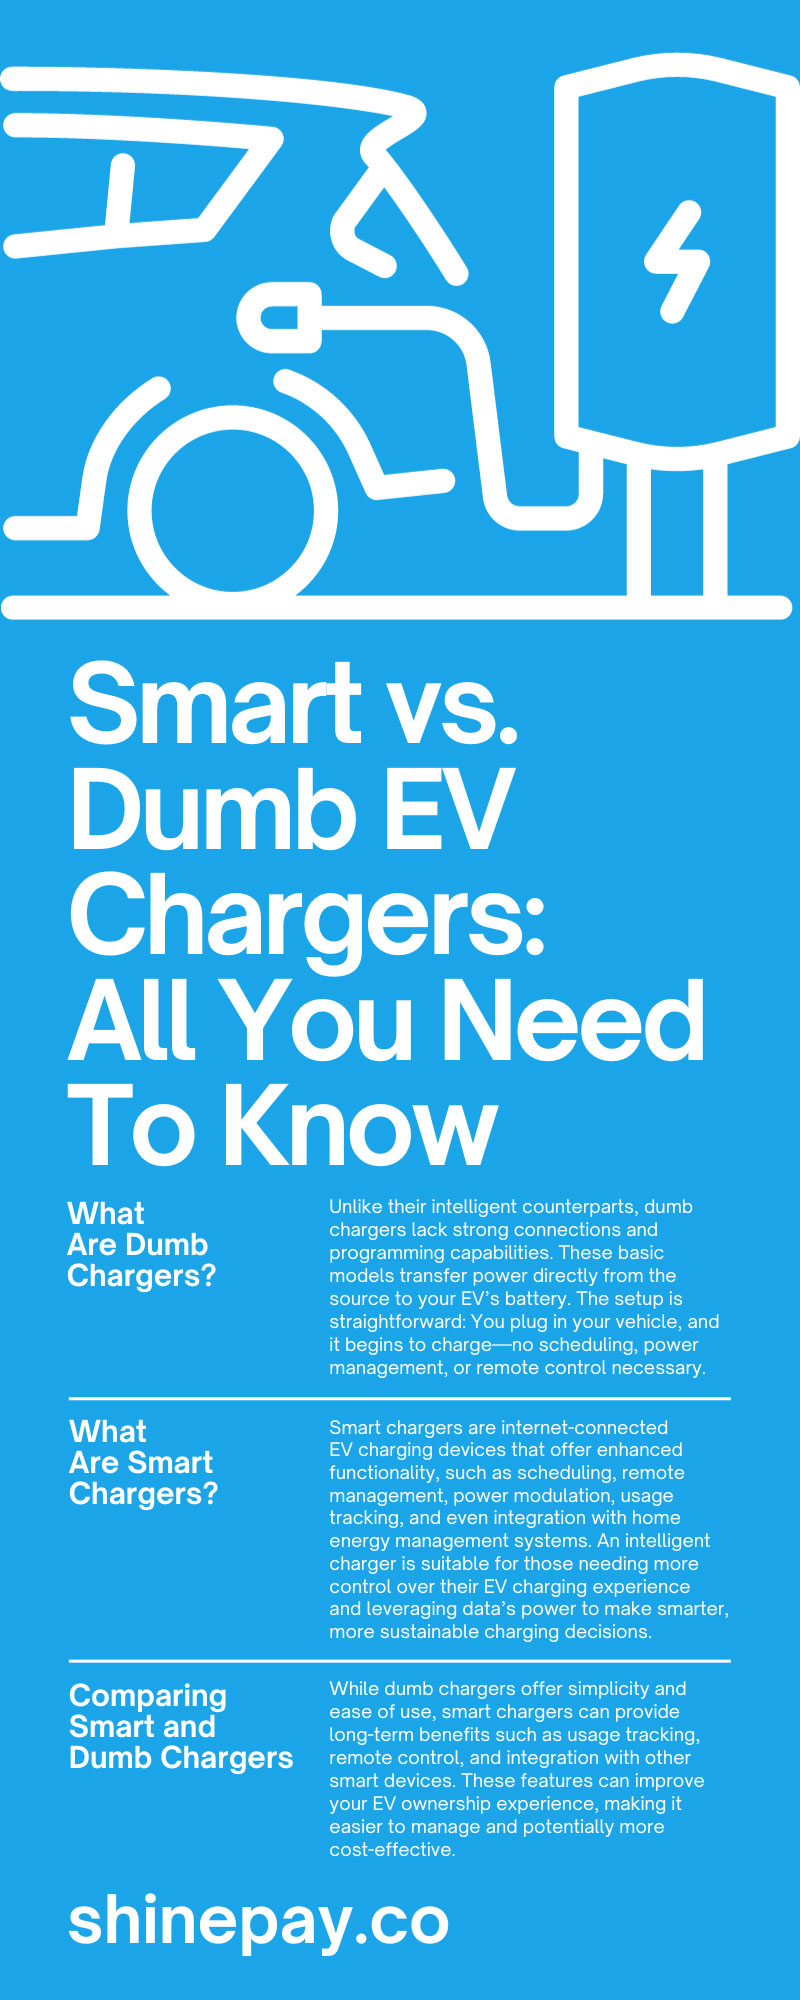 Smart vs. Dumb EV Chargers: All You Need To Know
